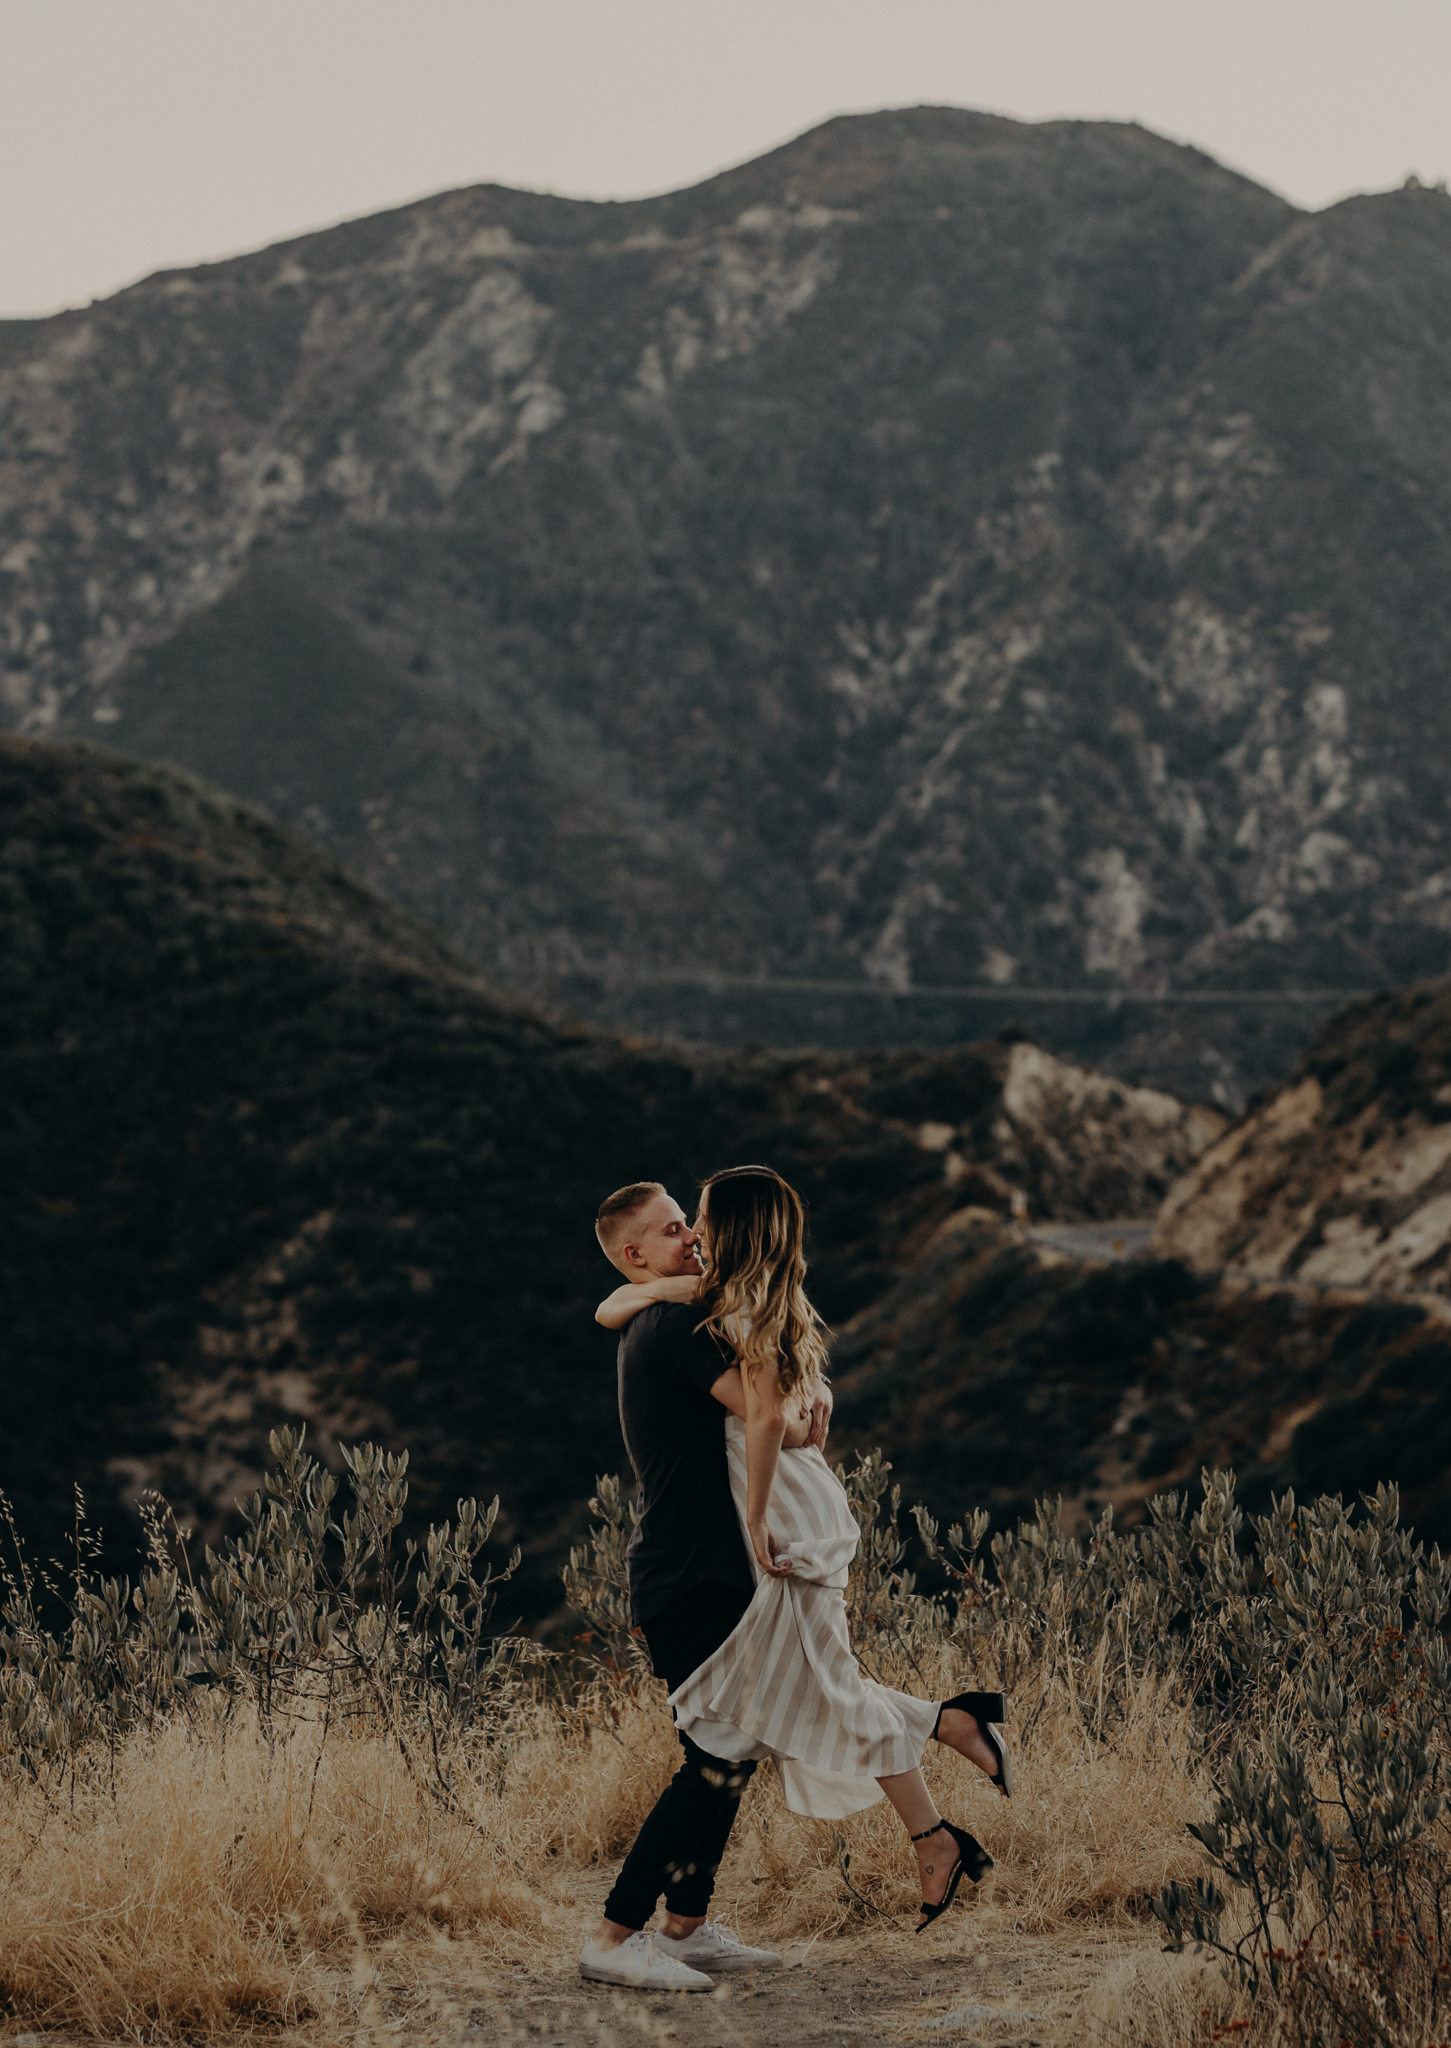 Isaiah + Taylor Photography - Los Angeles Forest Engagement Session - Laid back wedding photographer-021.jpg